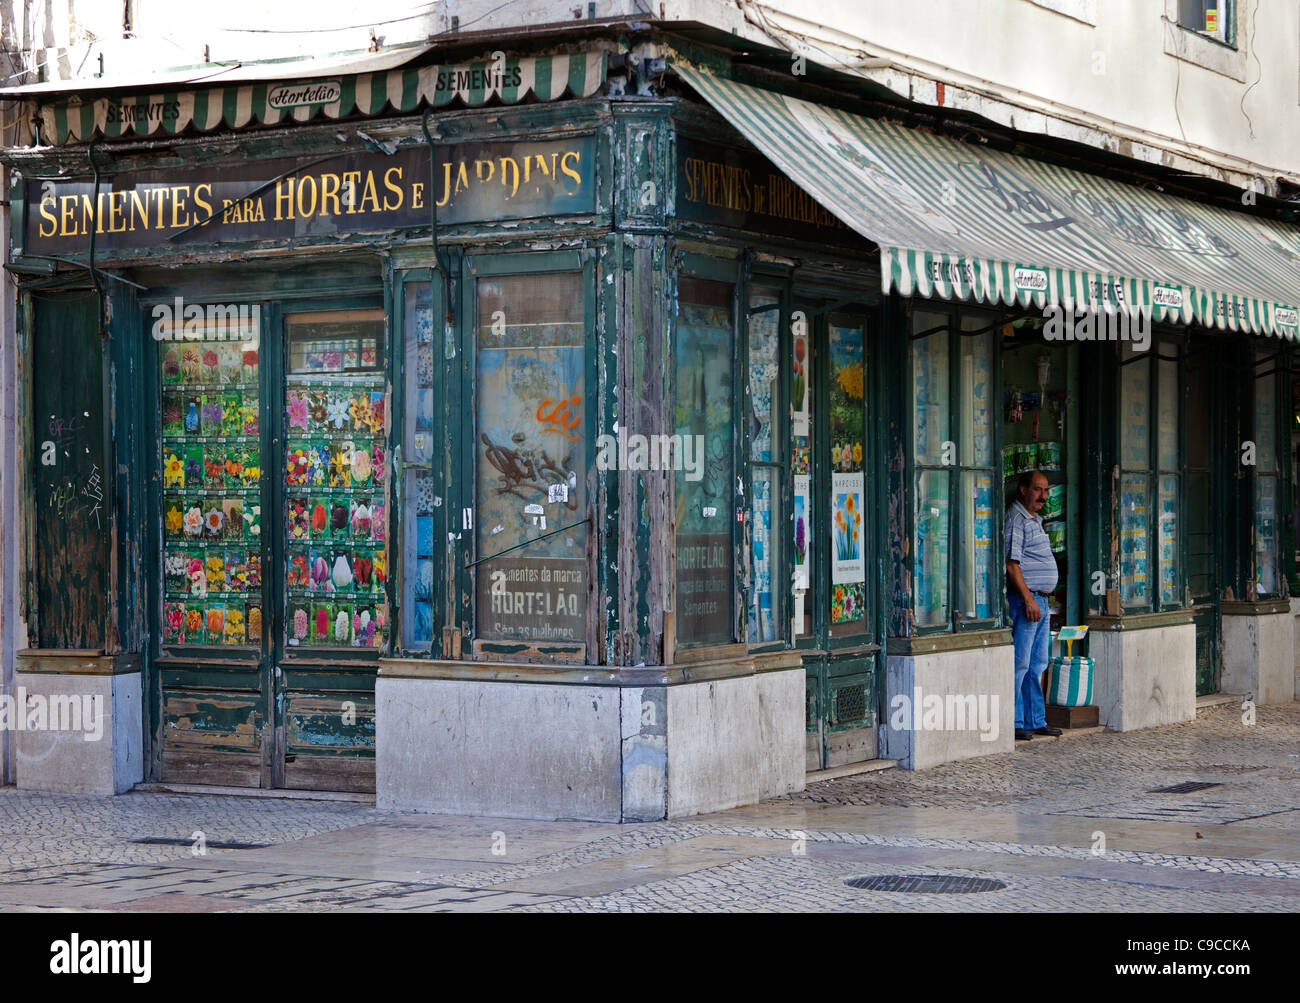 Vintage shopfront in the Rossio district selling garden bulbs and supplies Stock Photo